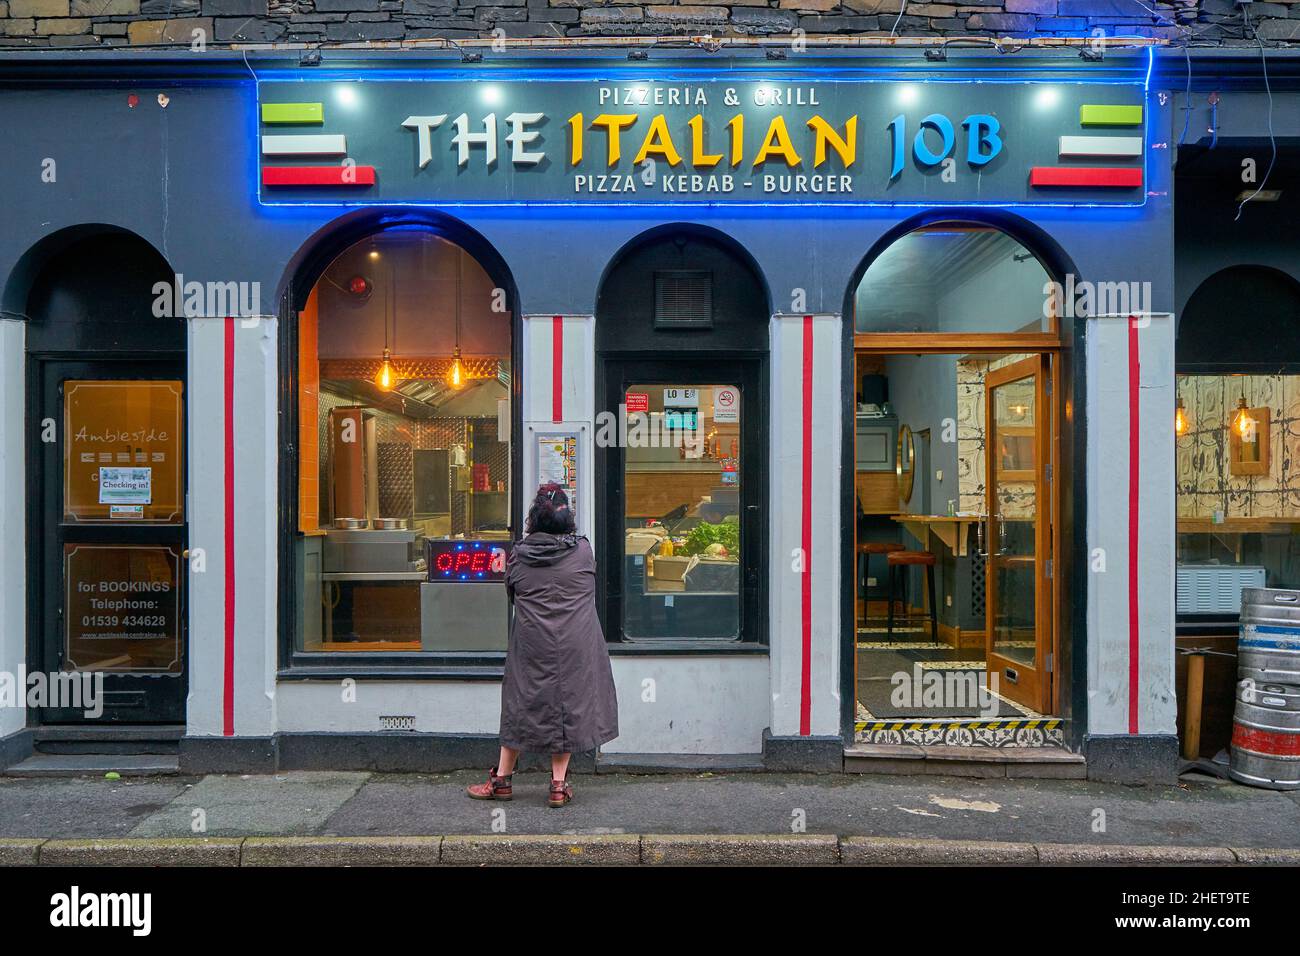 Façade of the colourful Italian Job pizzeria and grill in the town of Ambleside, Cumbria with a lone female standing in front examining the menu Stock Photo